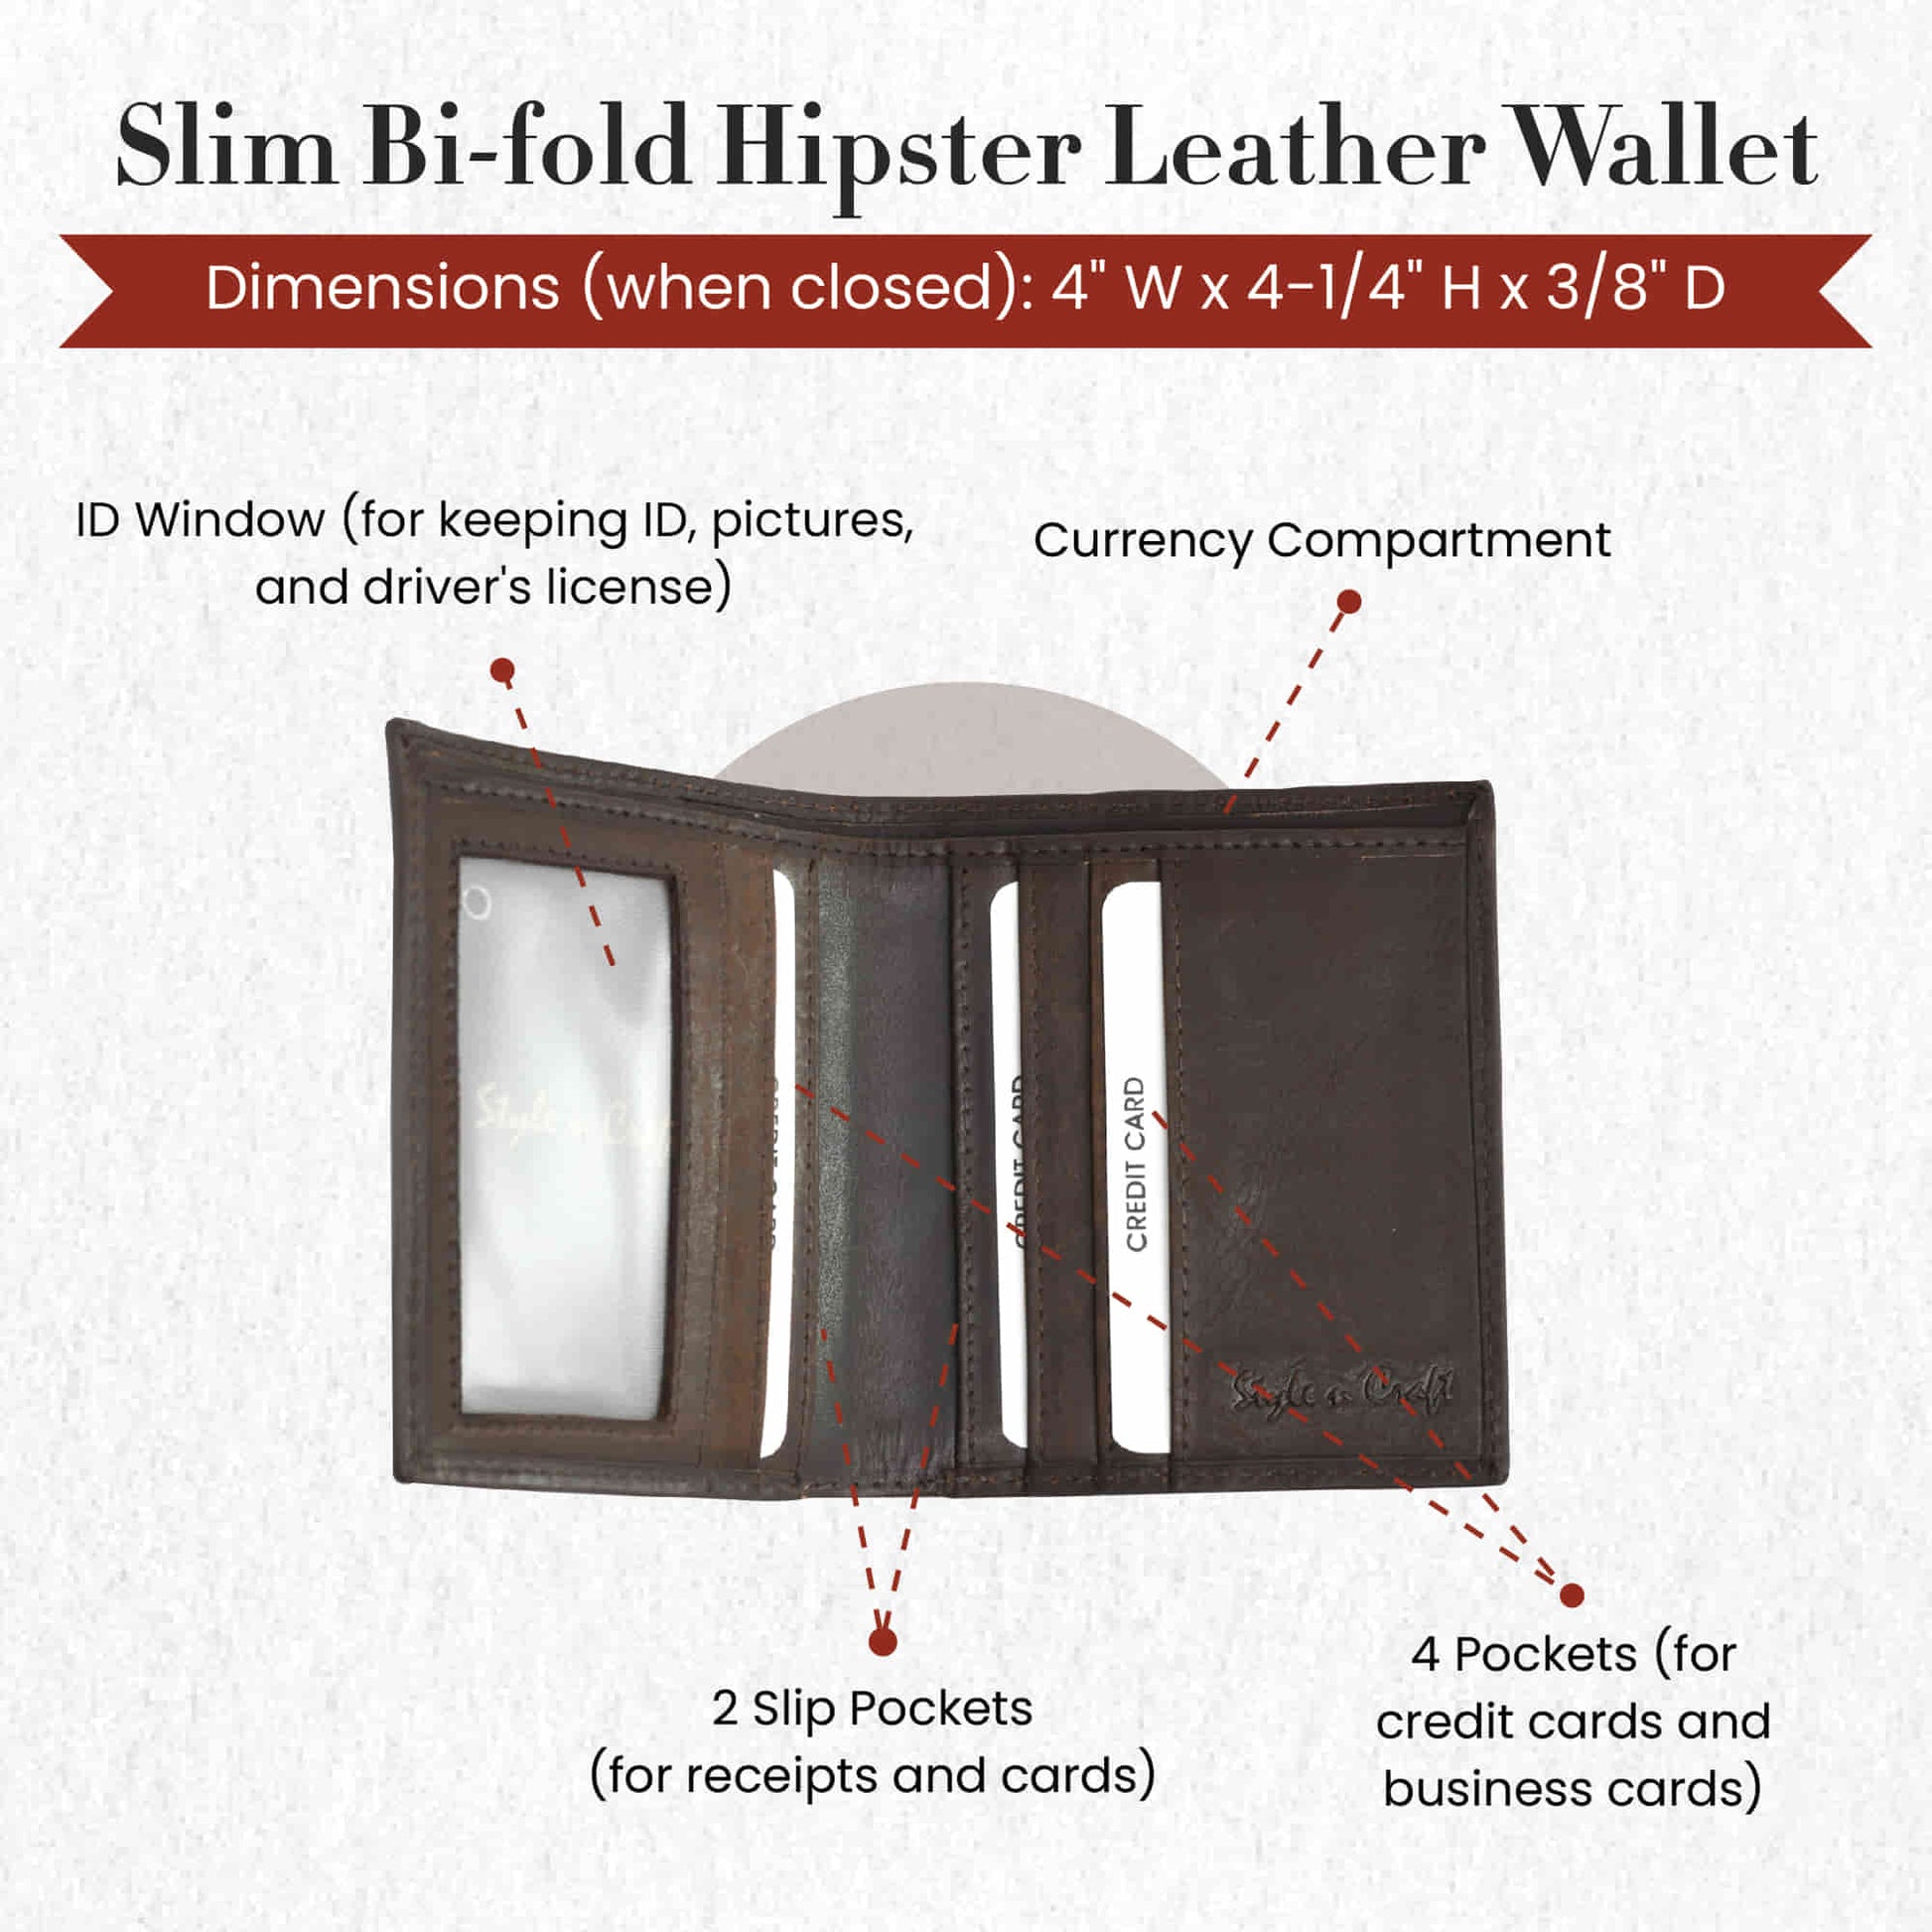 Style n Craft 391002 Slim Bifold Hipster Leather Wallet in Dark Brown Color - Open View Showing the Details